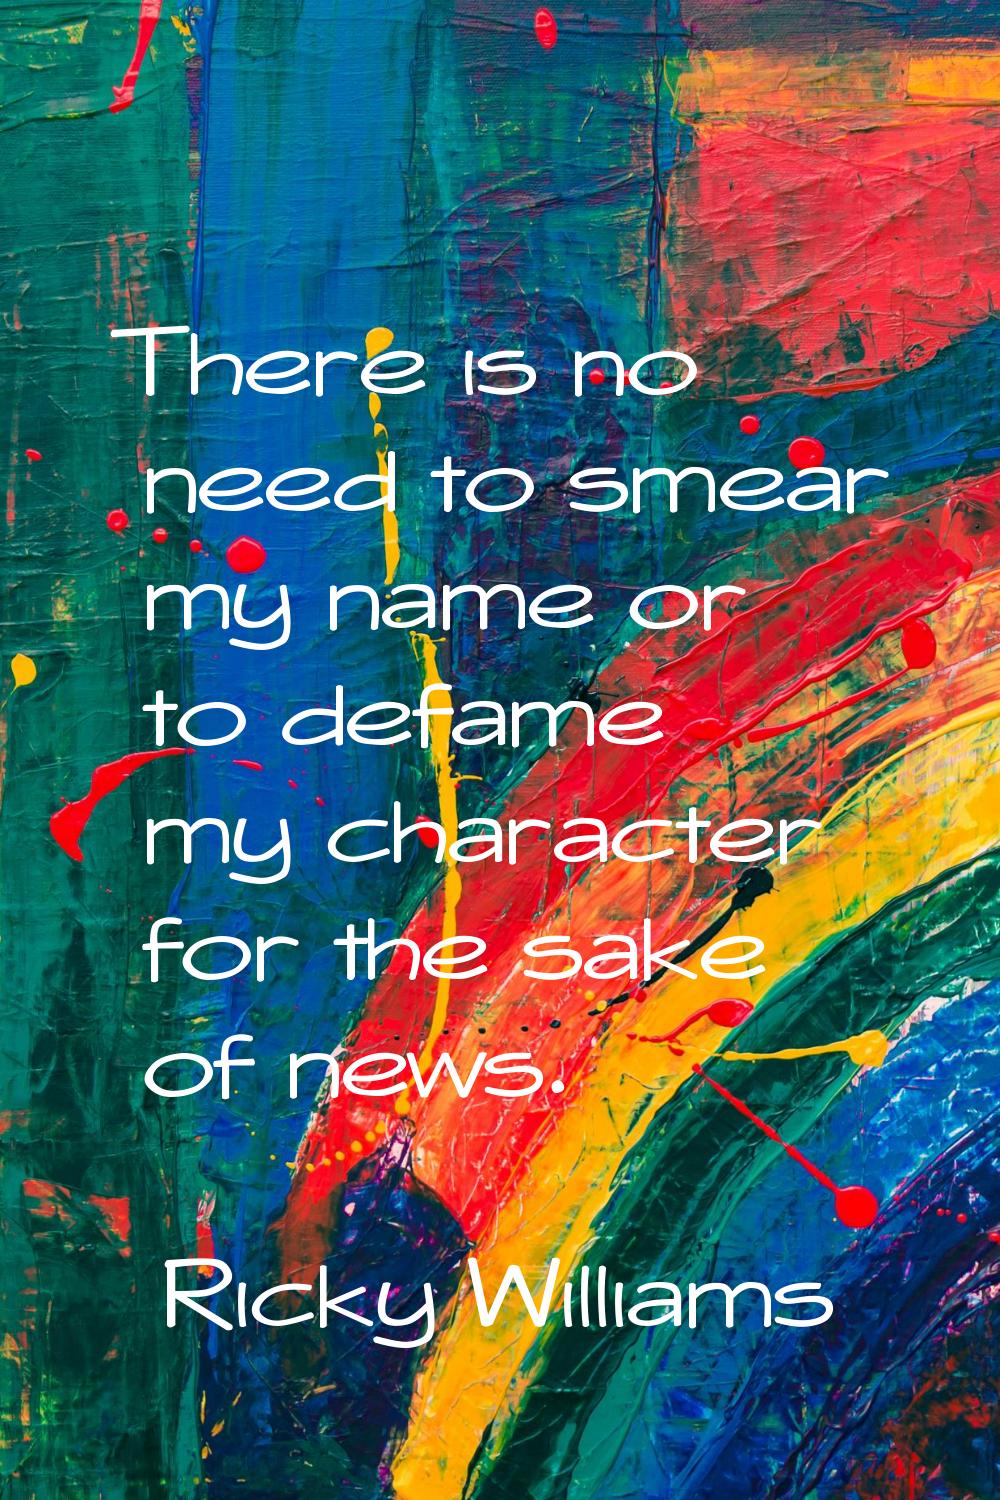 There is no need to smear my name or to defame my character for the sake of news.